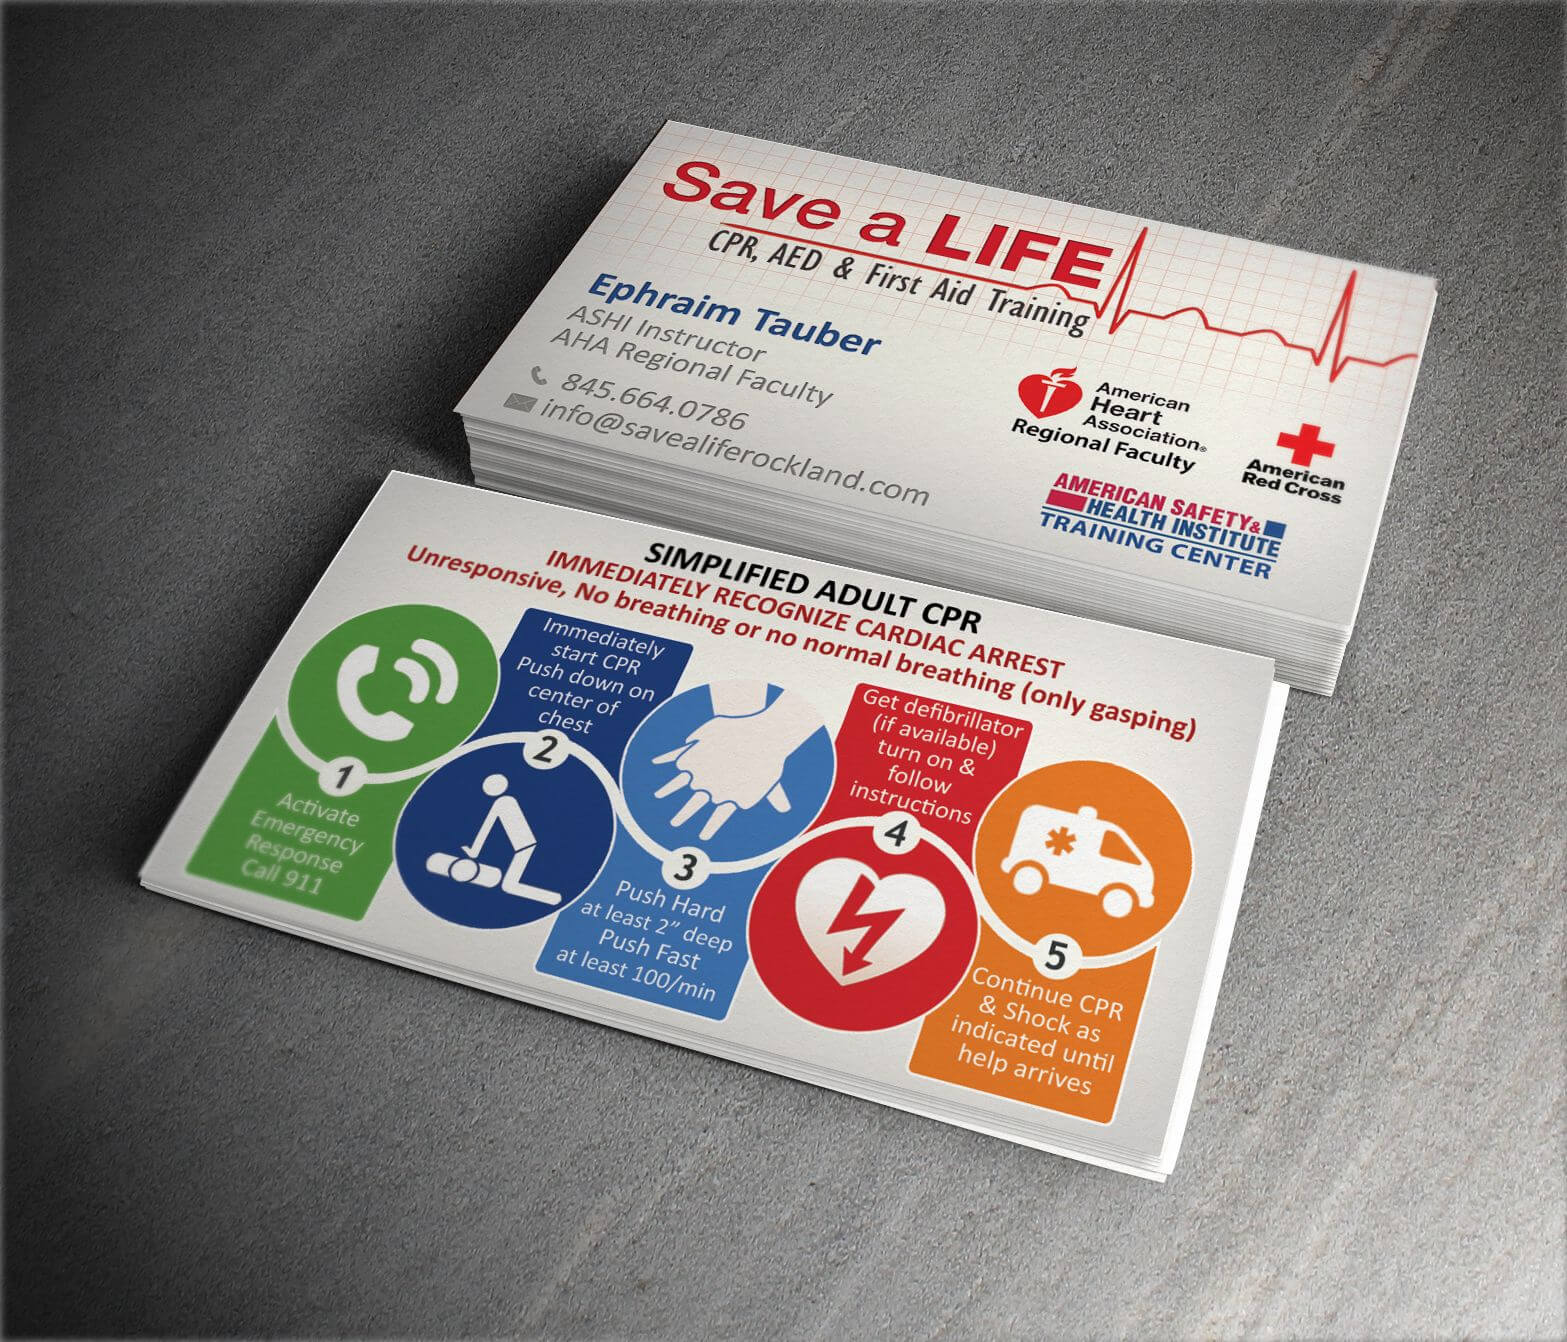 Cpr Customizable Business Cards Instructor Card Plans Plan Pertaining To Cpr Card Template